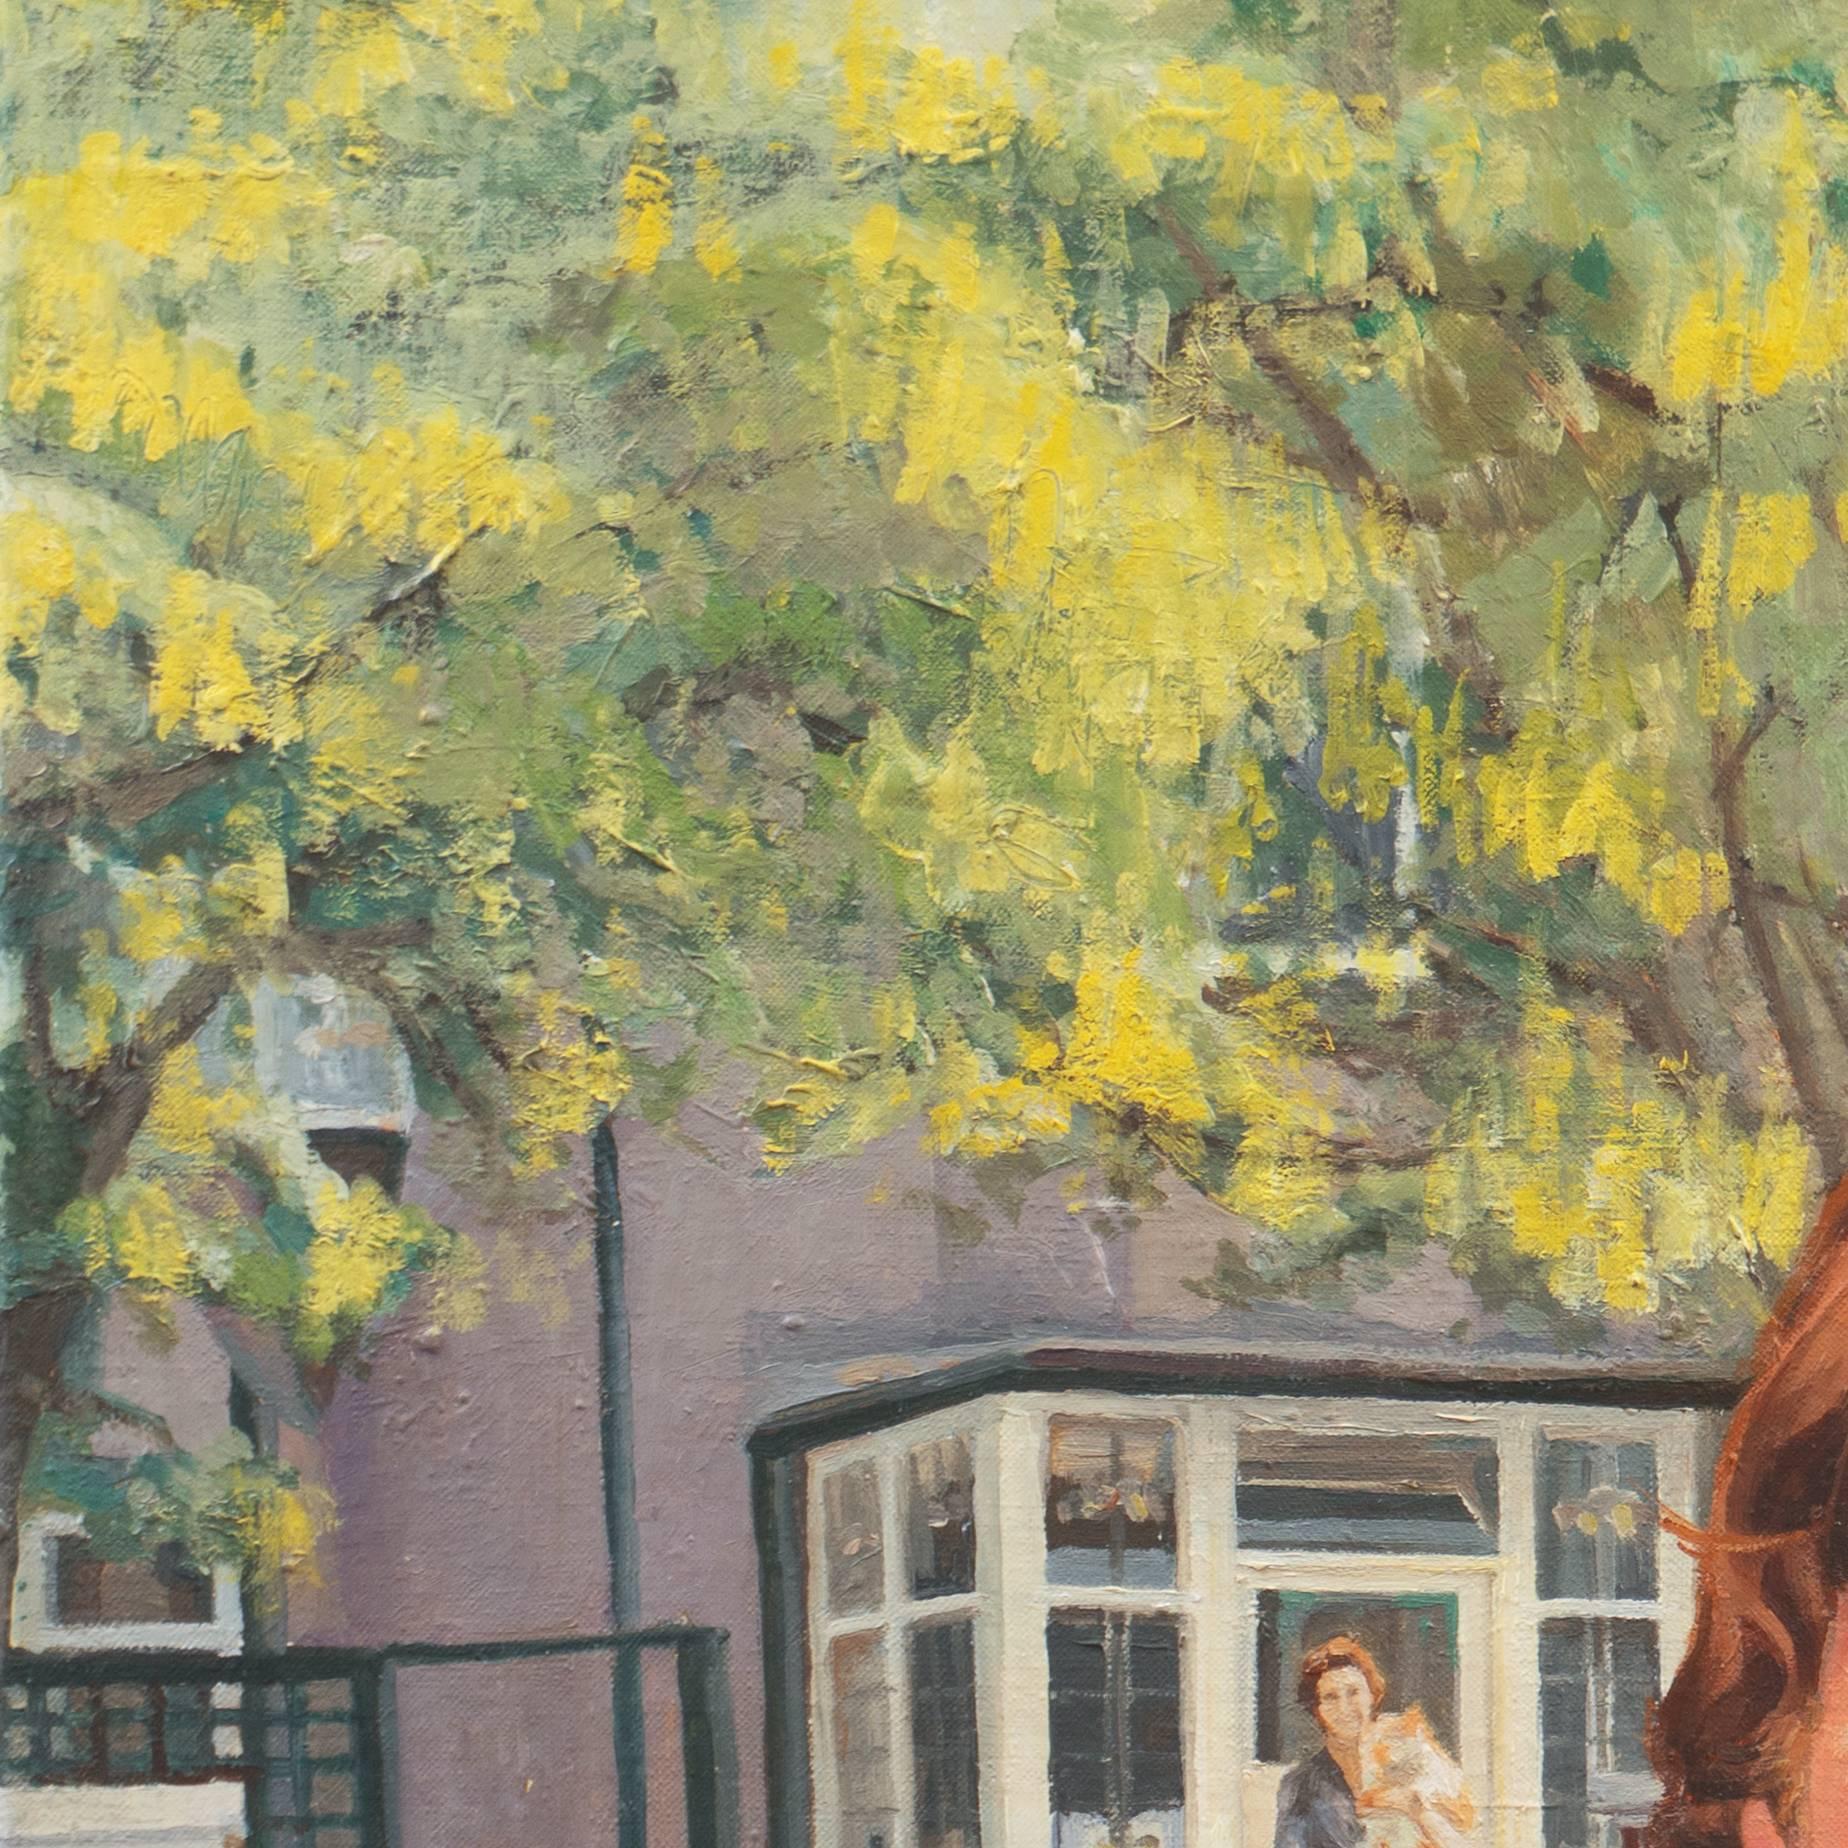 'John and Mimi with Tim', John Lennon, England, Manchester College of Art - Impressionist Painting by Stephen Bower